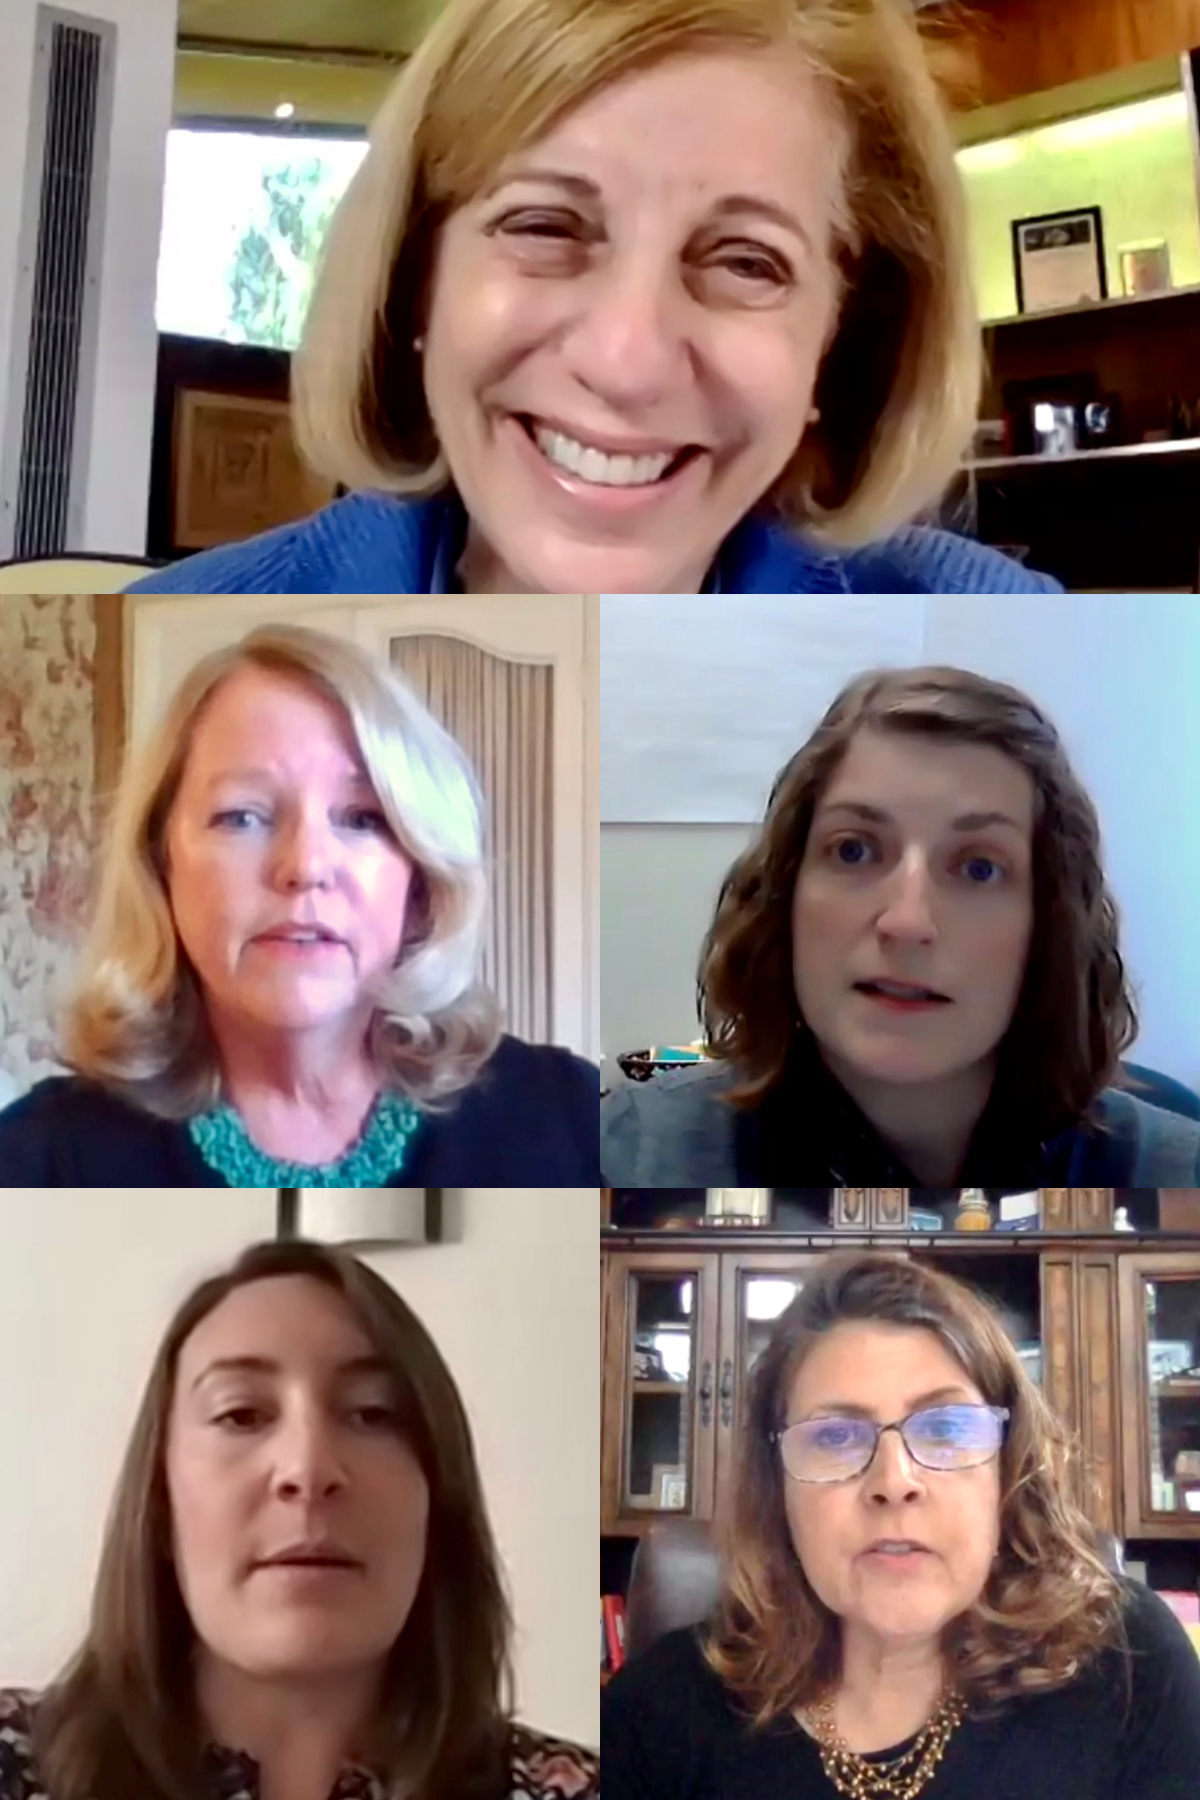 San Diego City Council member Barbara Bry's "House Calls" webinar April 20 featured four area nursing experts. Pictured are Bry (top), Dr. Kathy Marsh and Dr. Heather Warlan (second row) and clinical nurse Katie Moss and Dr. Karen Macauley (bottom row).